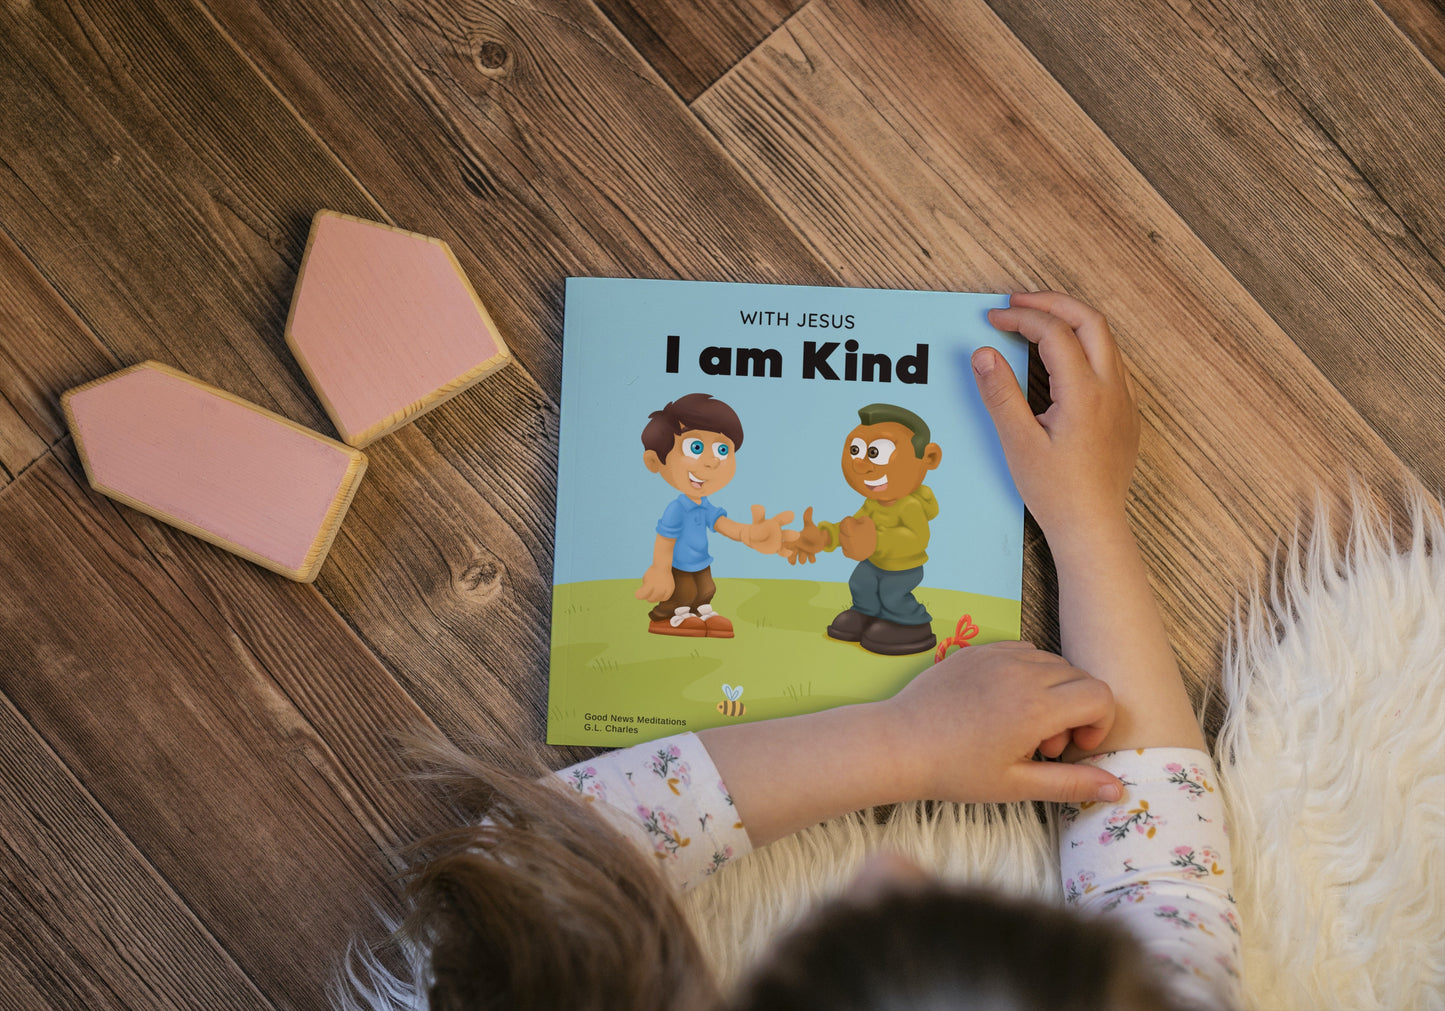 With Jesus I am Kind - Printed in the UK